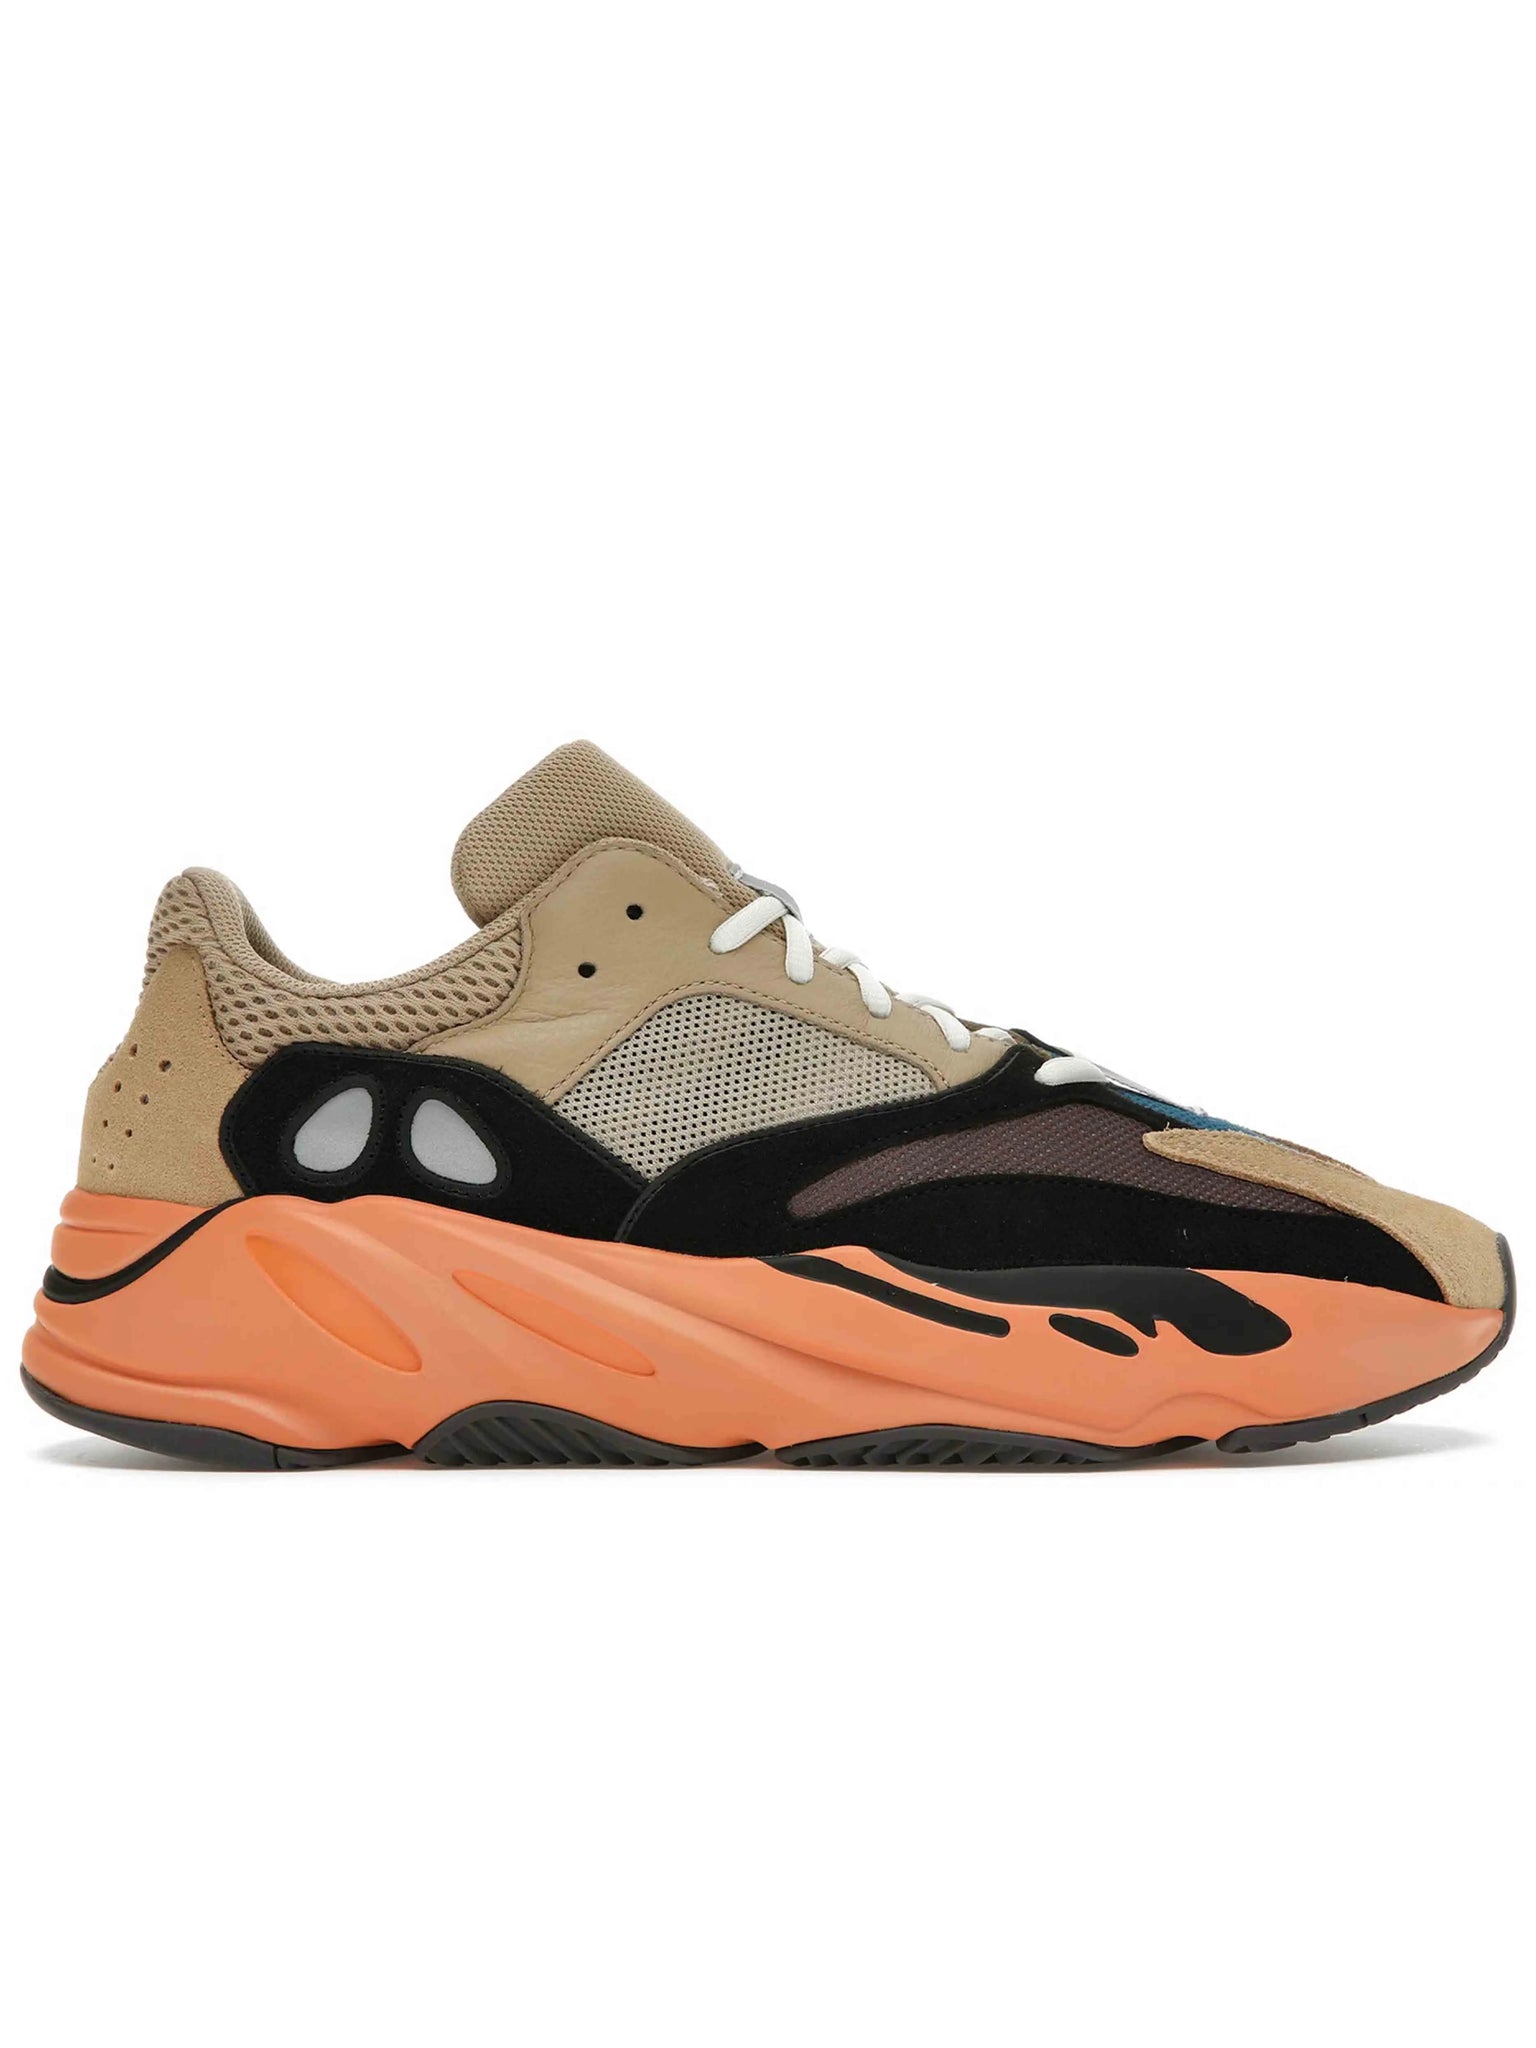 Adidas Yeezy Boost 700 Enflame Amber Prior